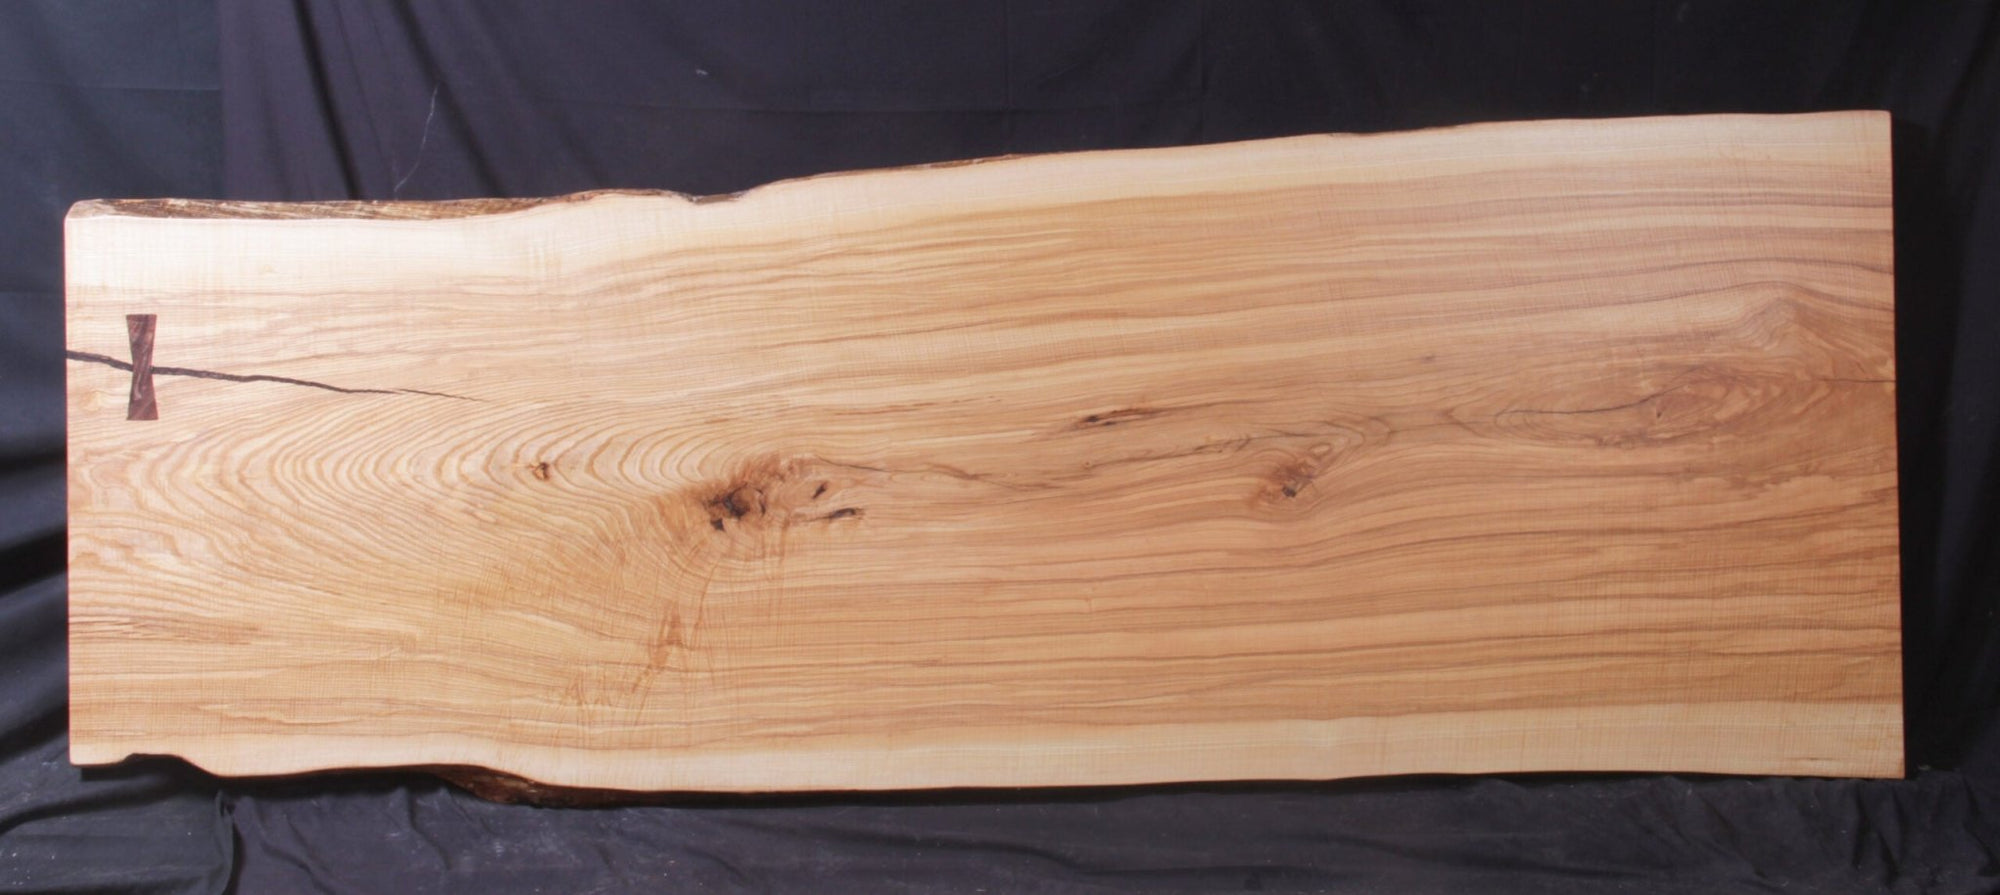 Ash 40" - 48" wide x 128" long x 2 1/2" thick Live Edge Slab - snyders.furniture